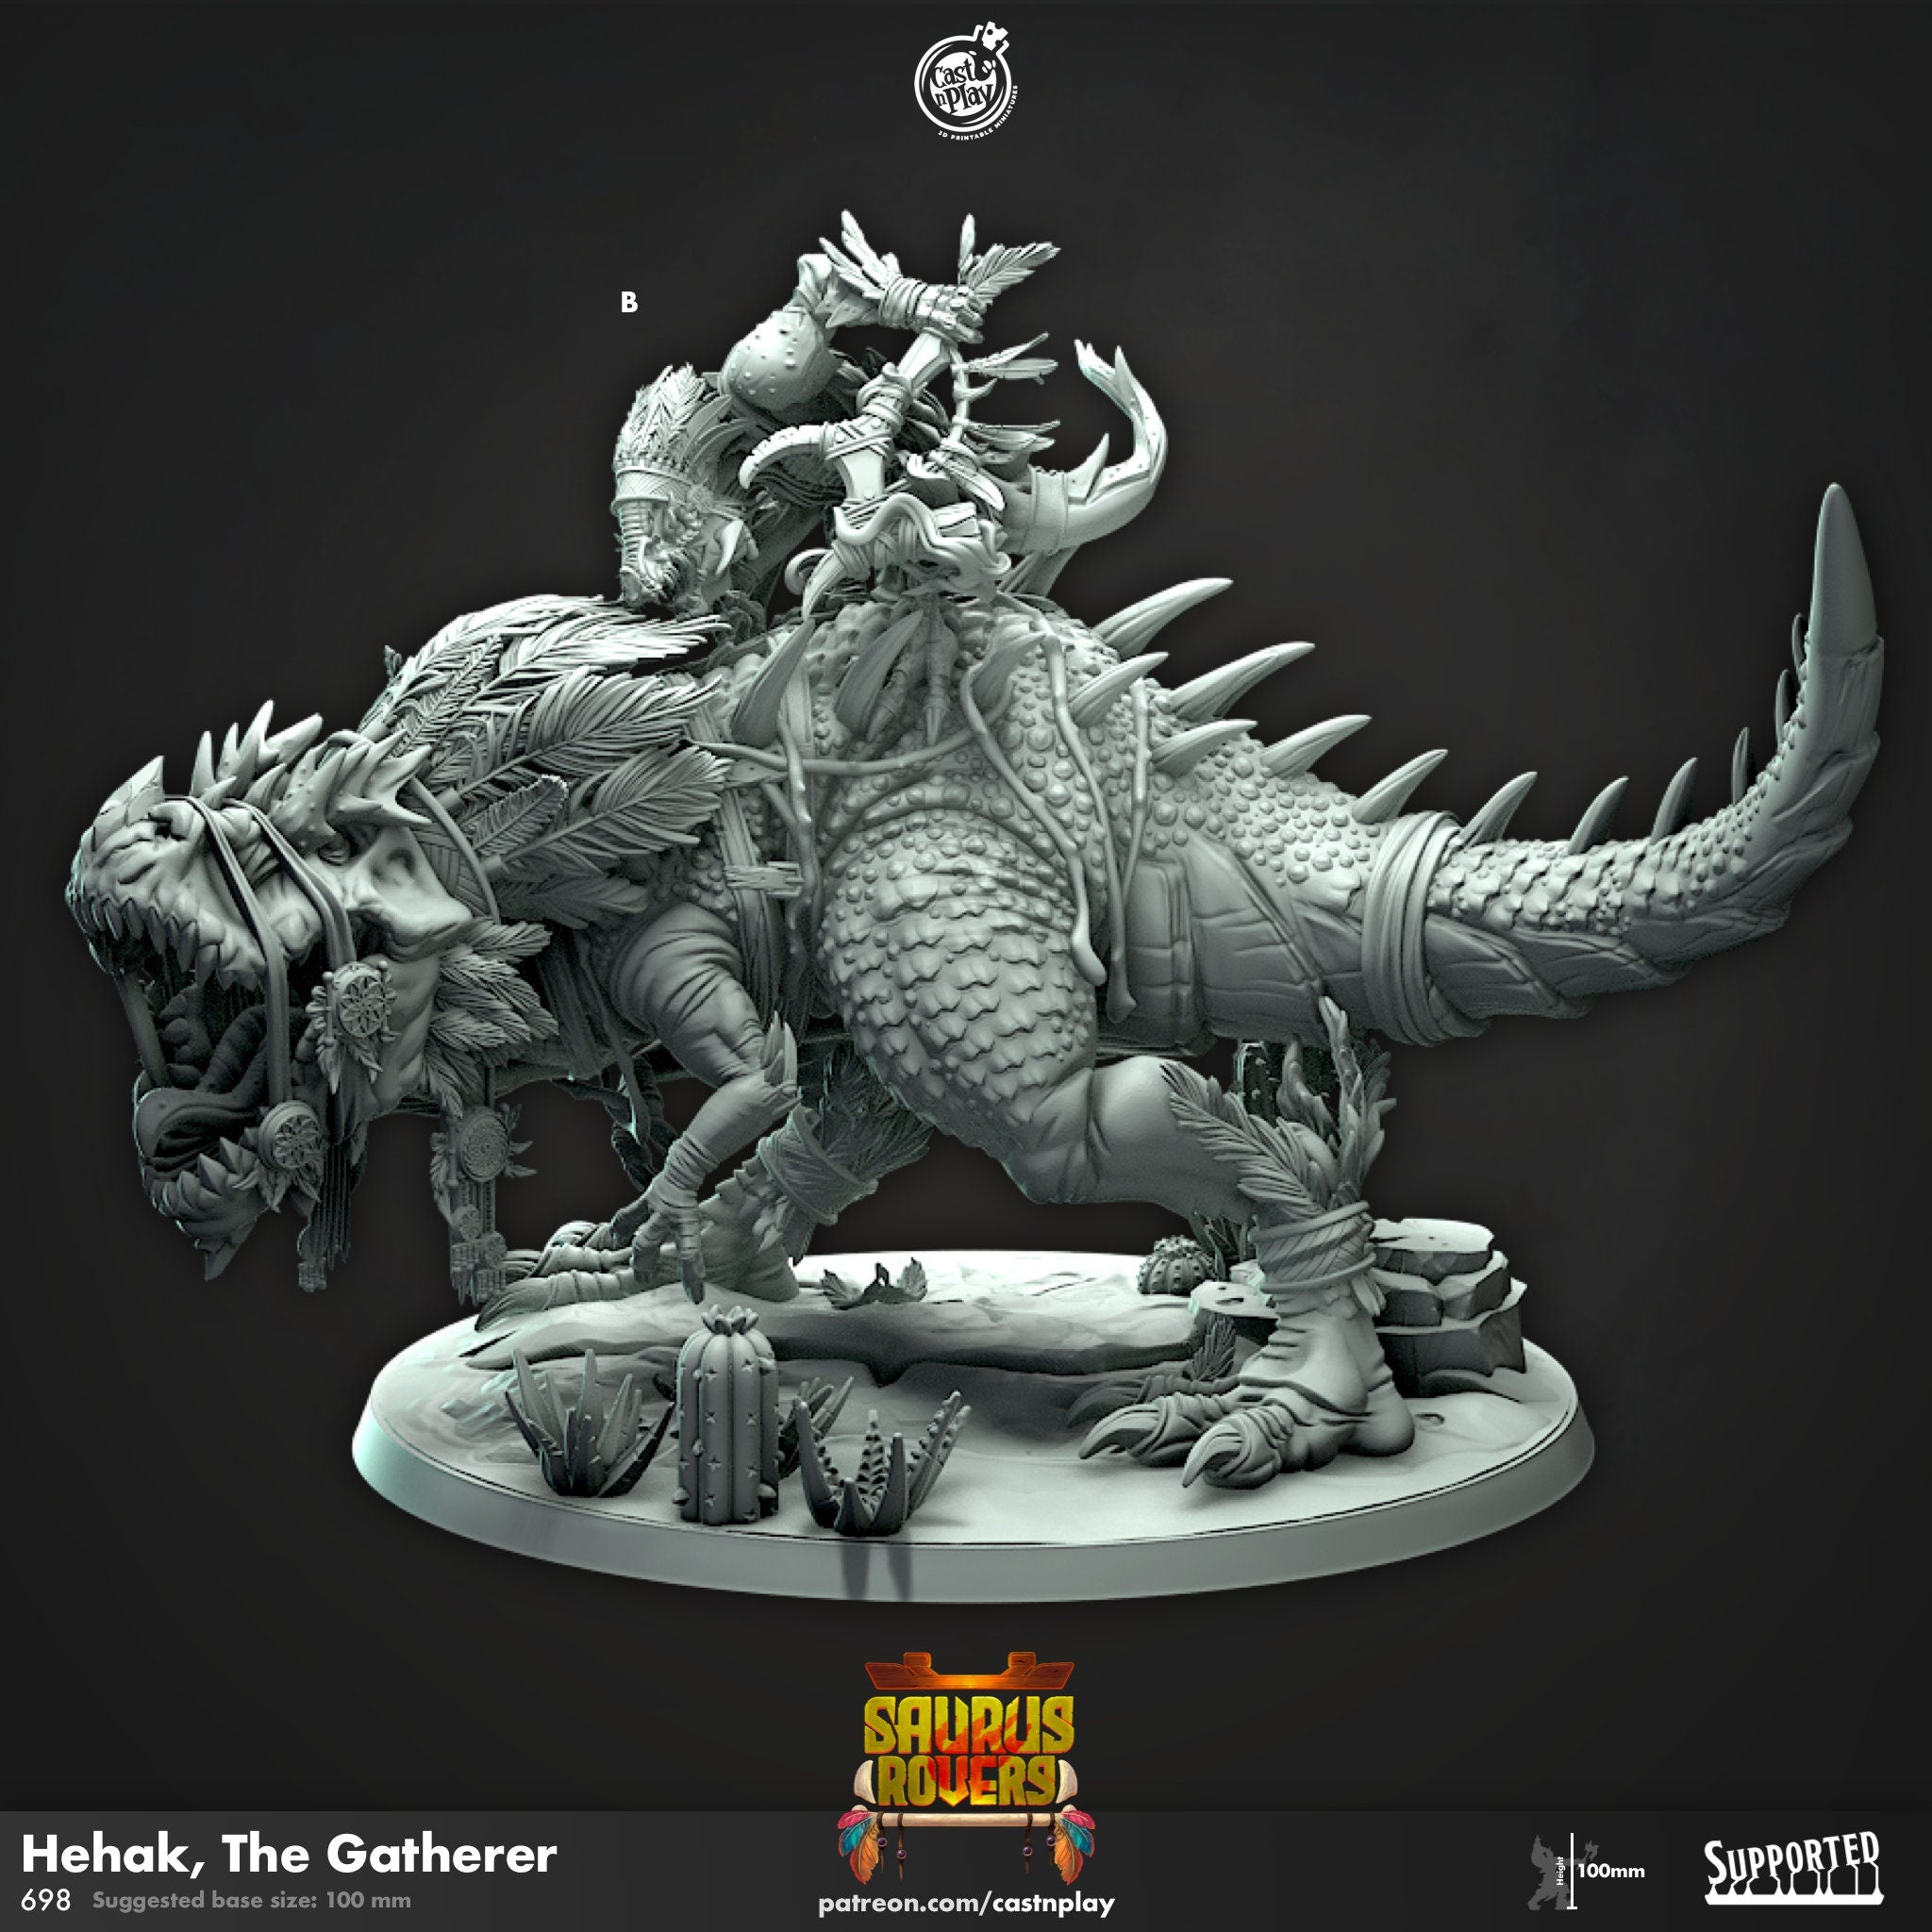 Hehak the Gatherer by Cast N Play (Saurus Rovers)